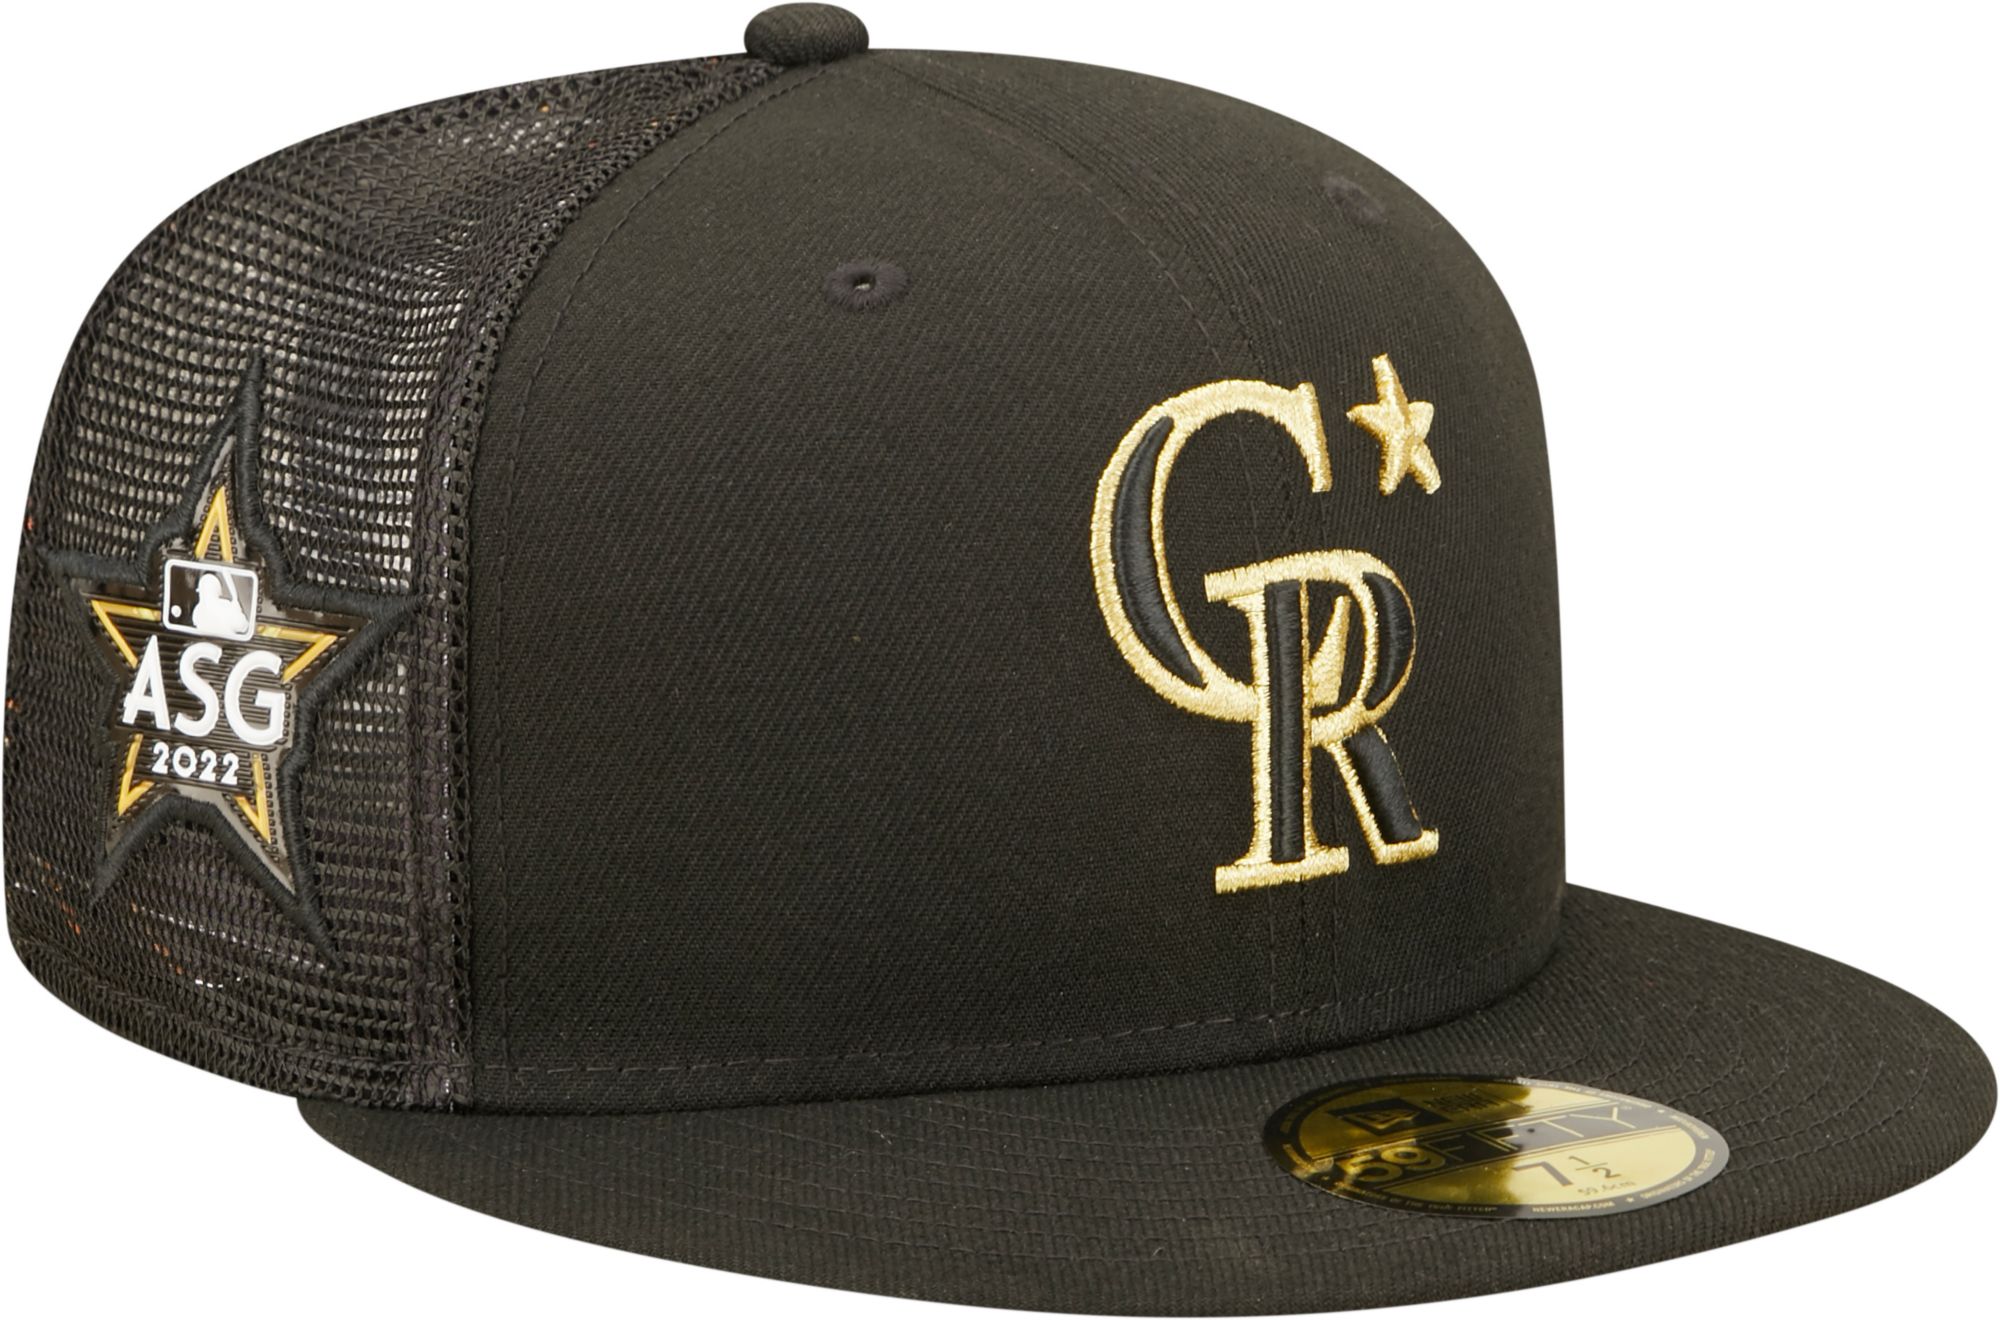 New Era Colorado Rockies Two Tone City Icon 59Fifty Fitted Hat, FITTED HATS, CAPS